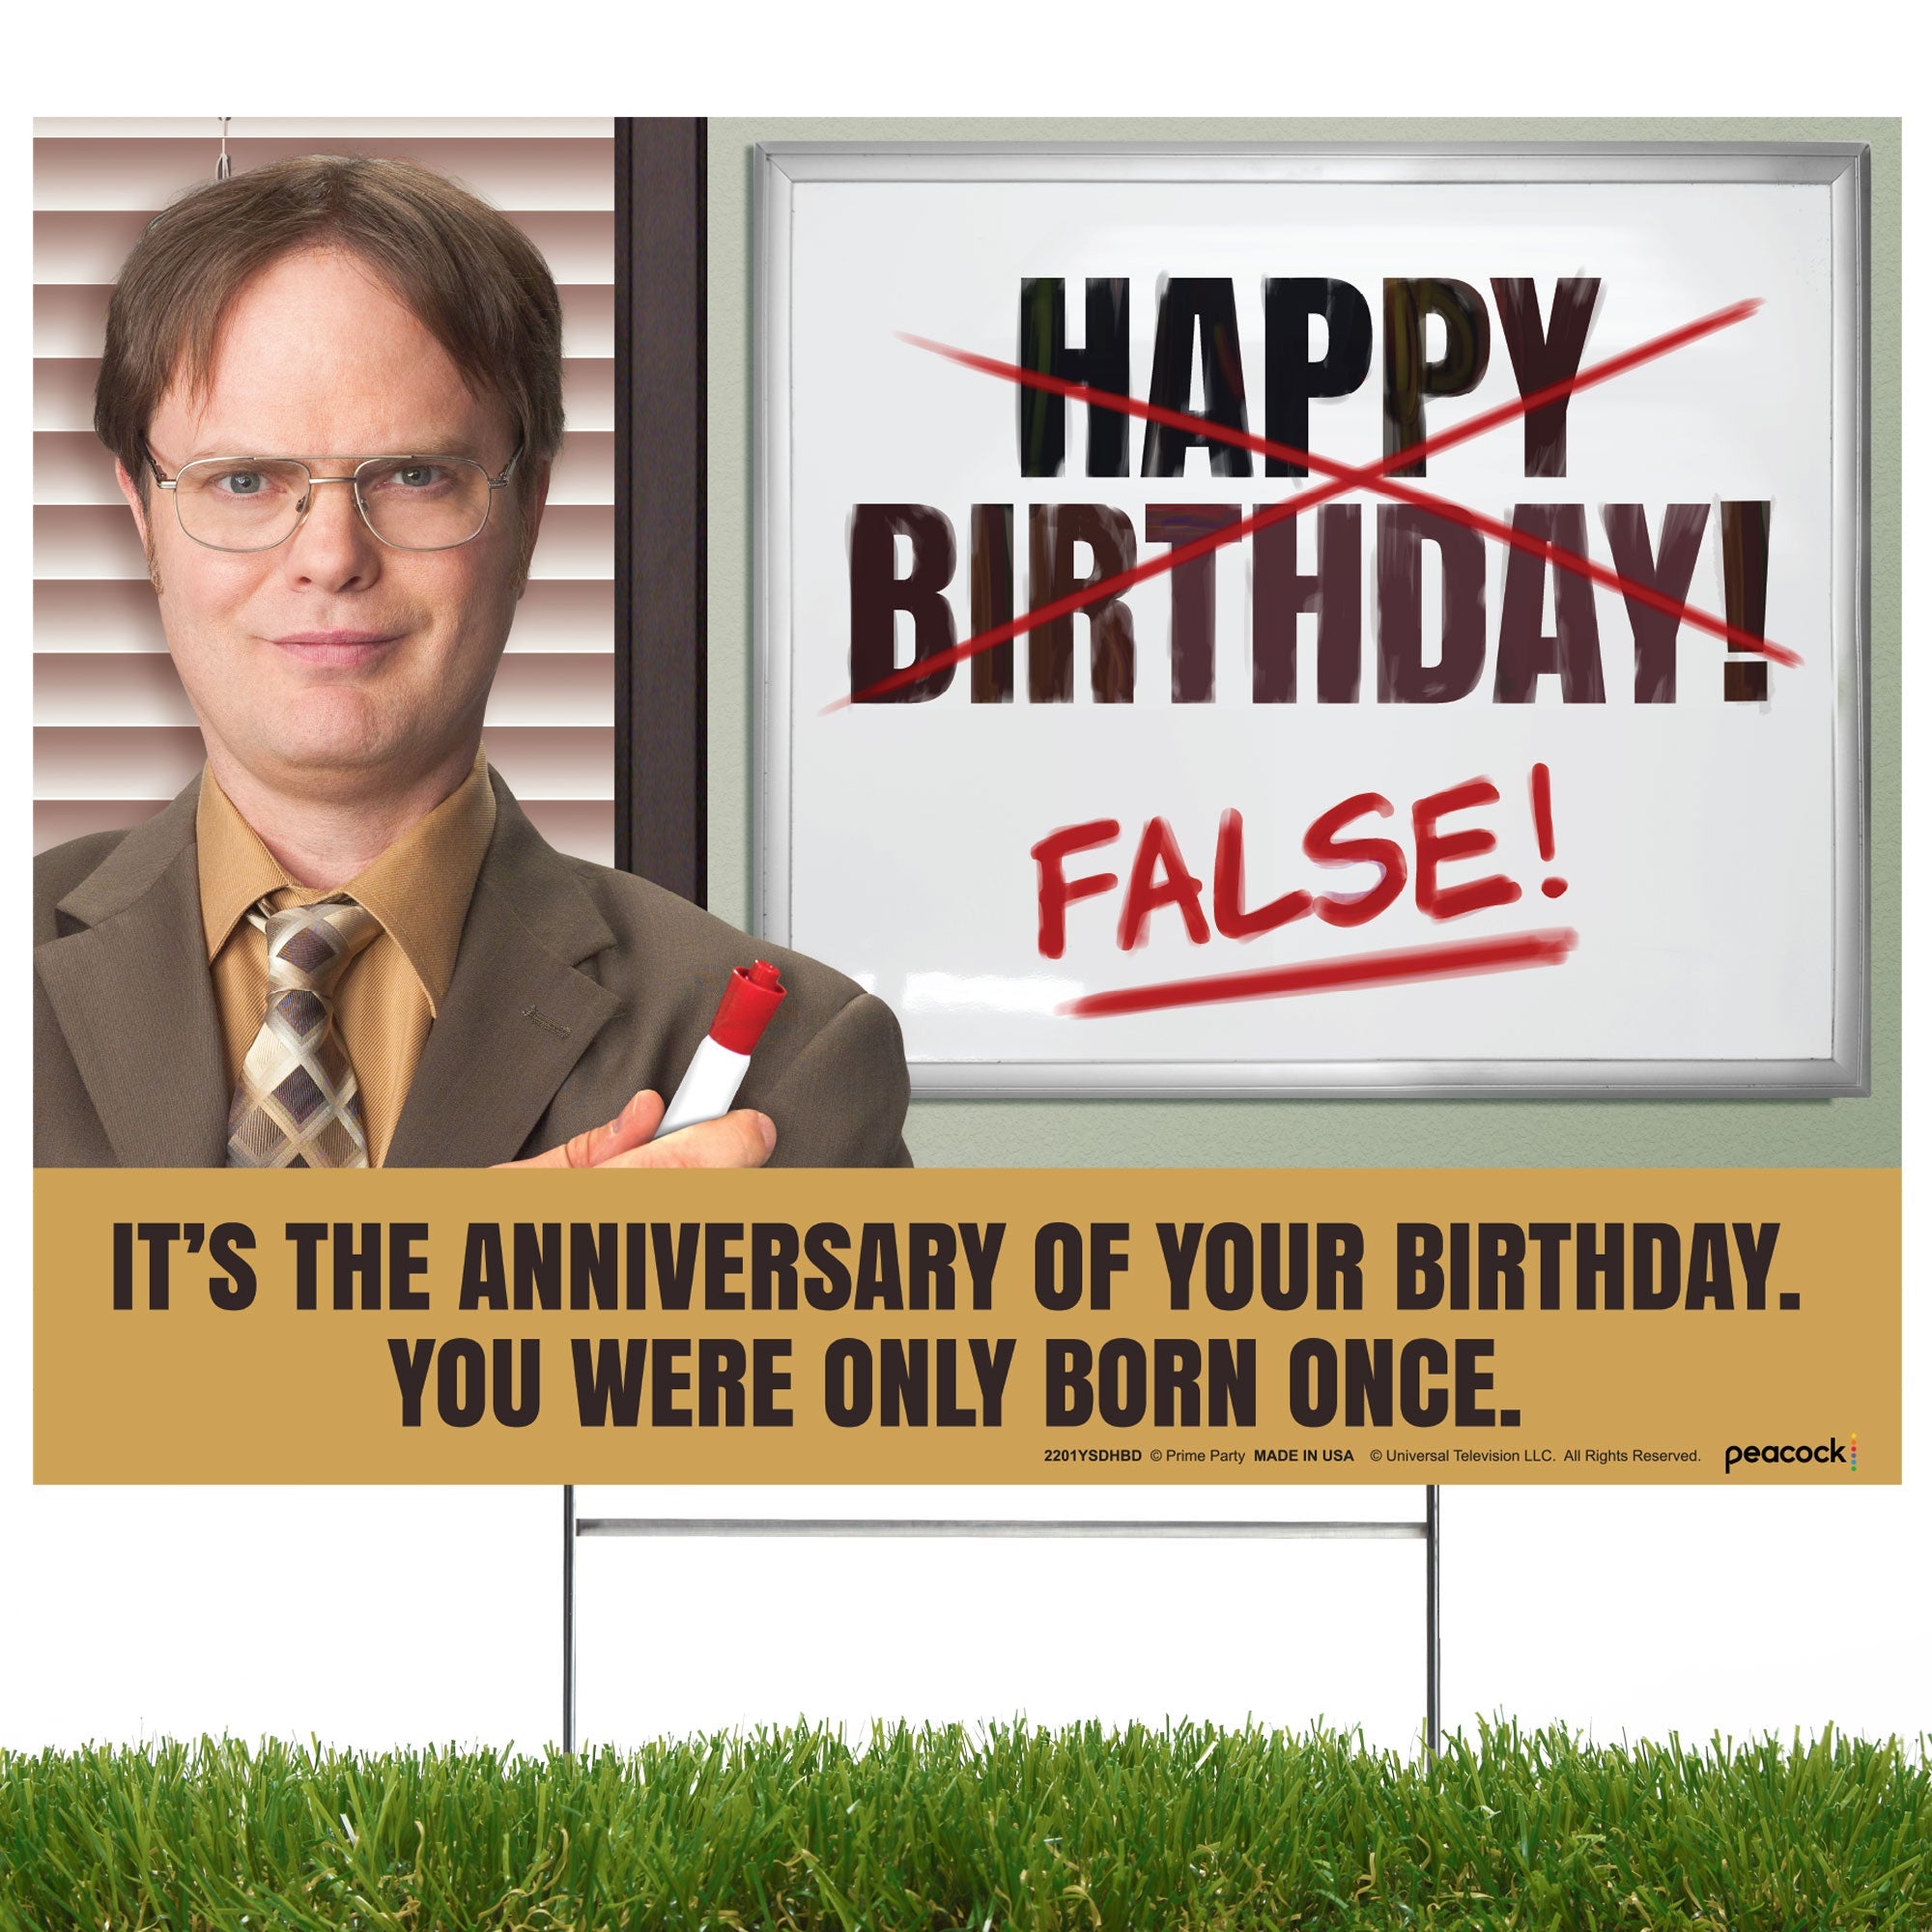 dwight schrute birthday quotes